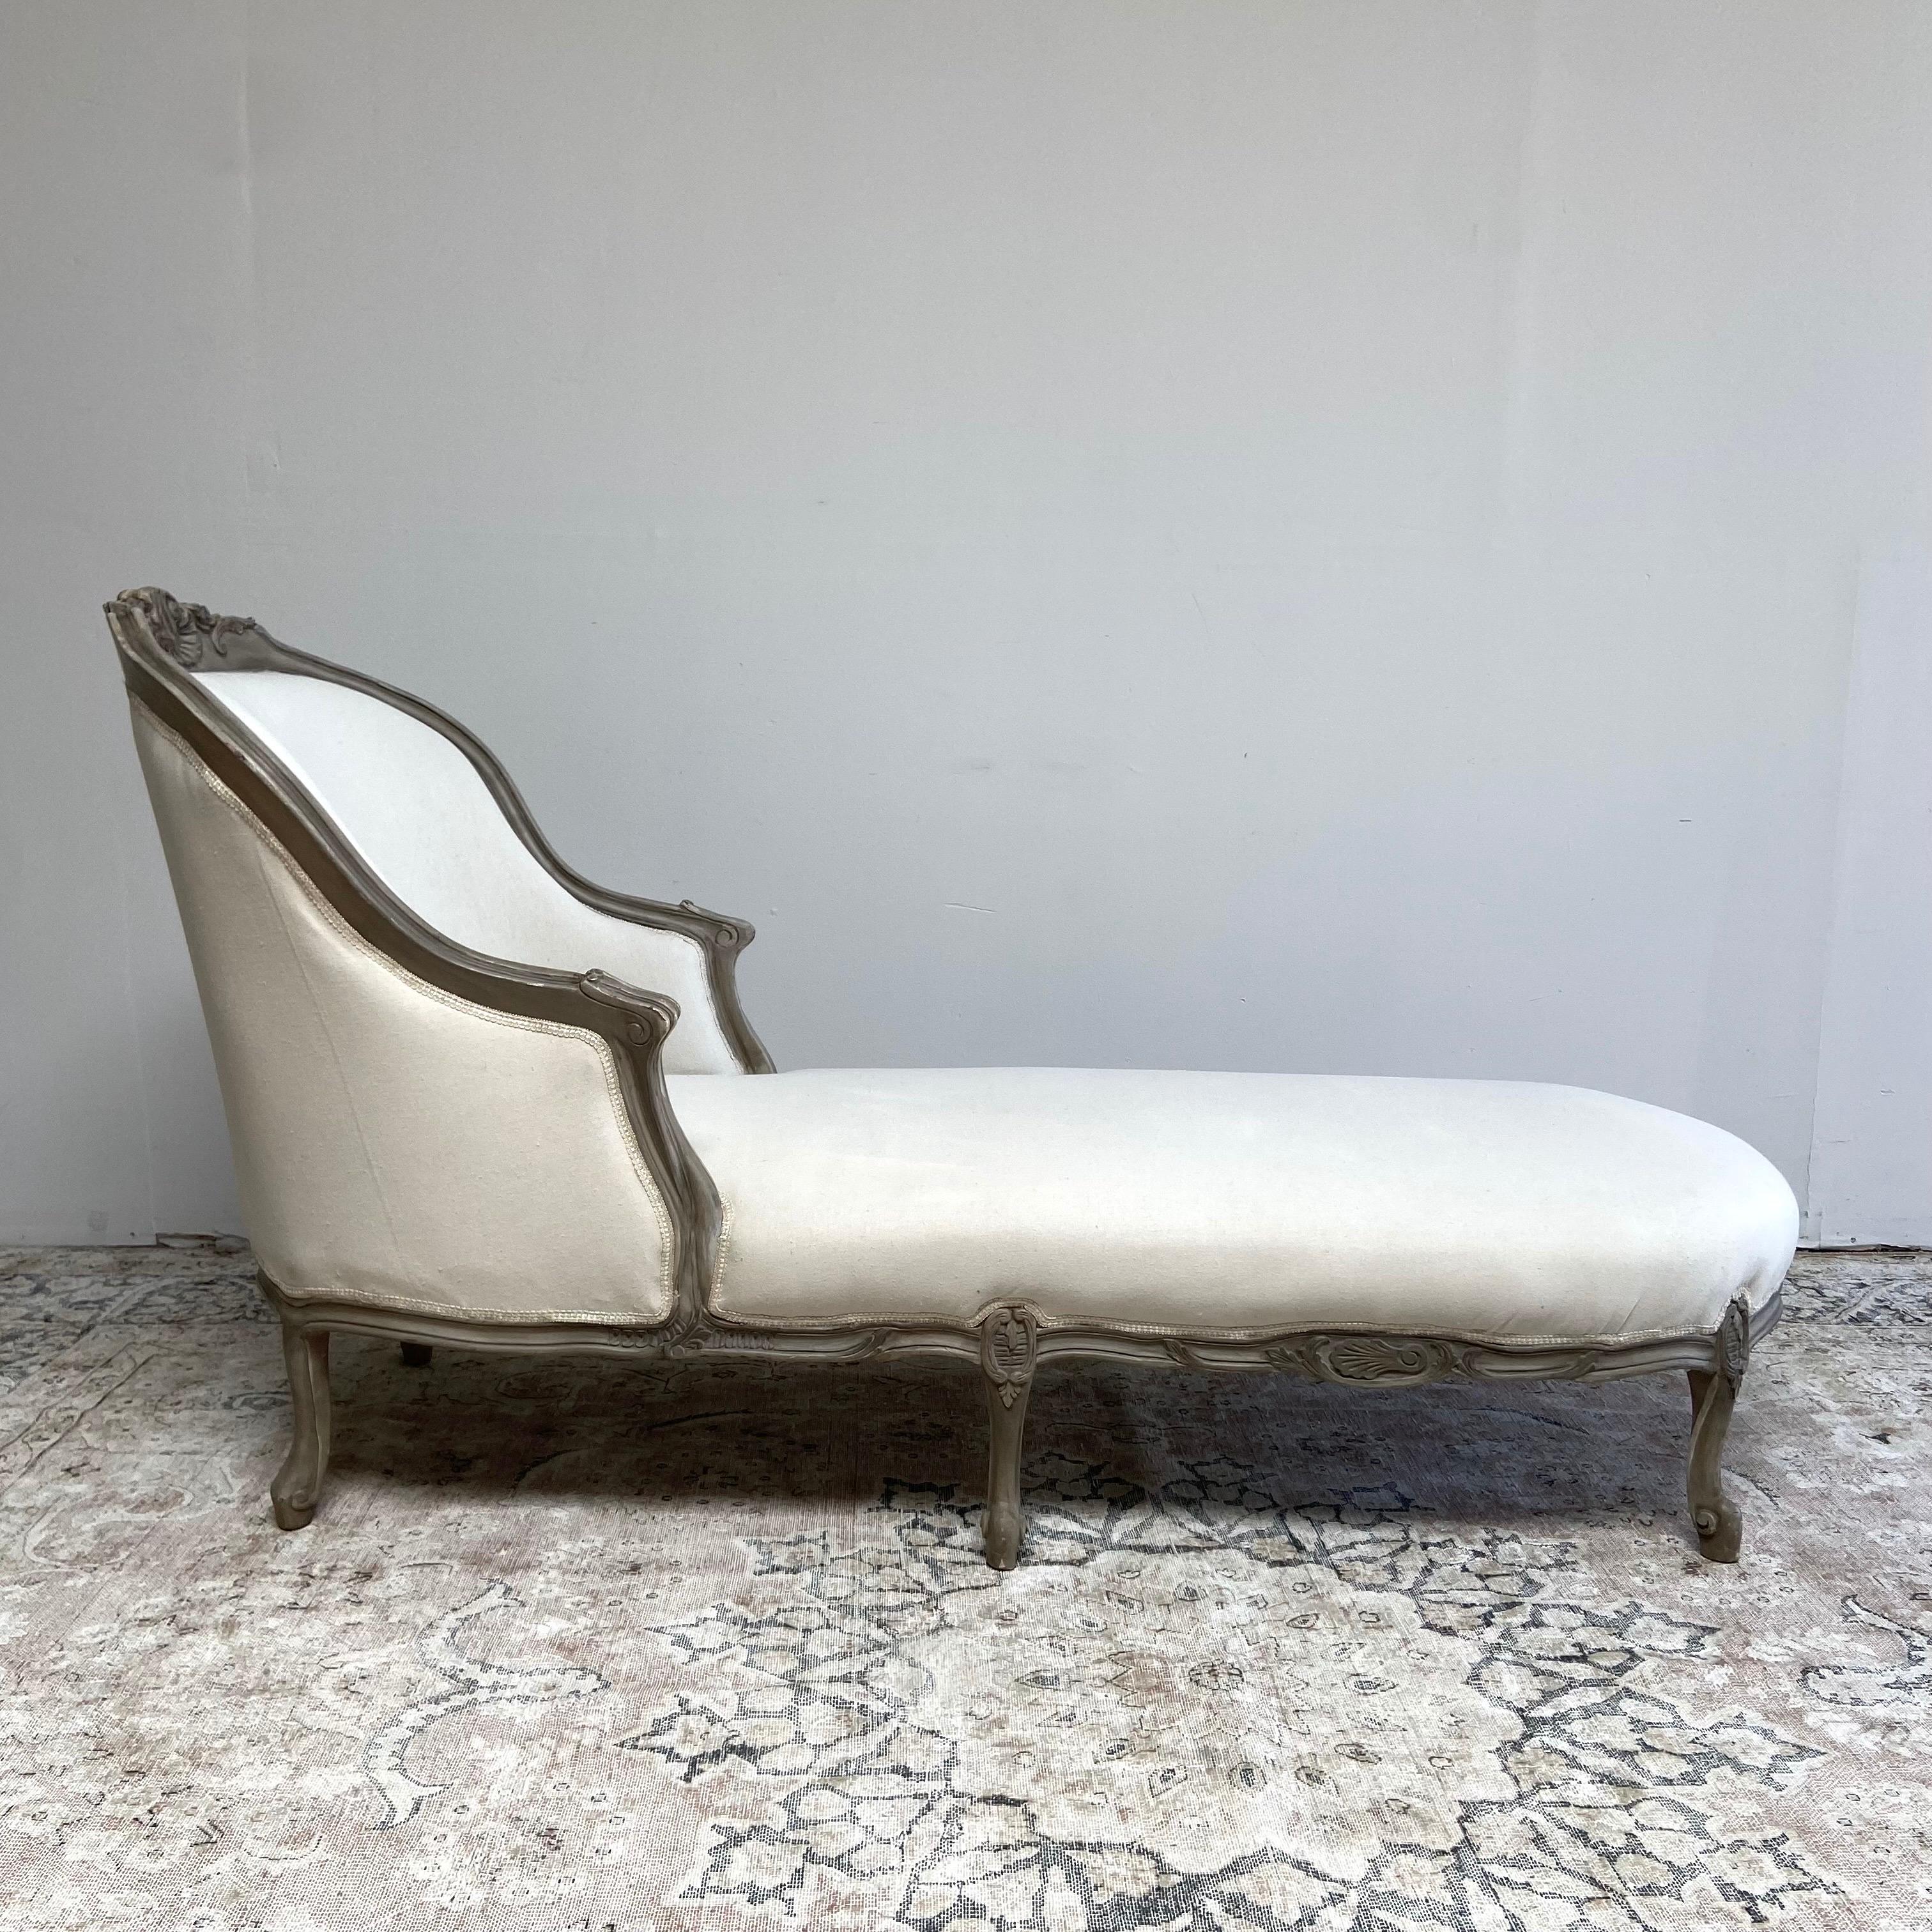 20th Century Vintage French Upholstered Chaise Lounge in Gray Finish